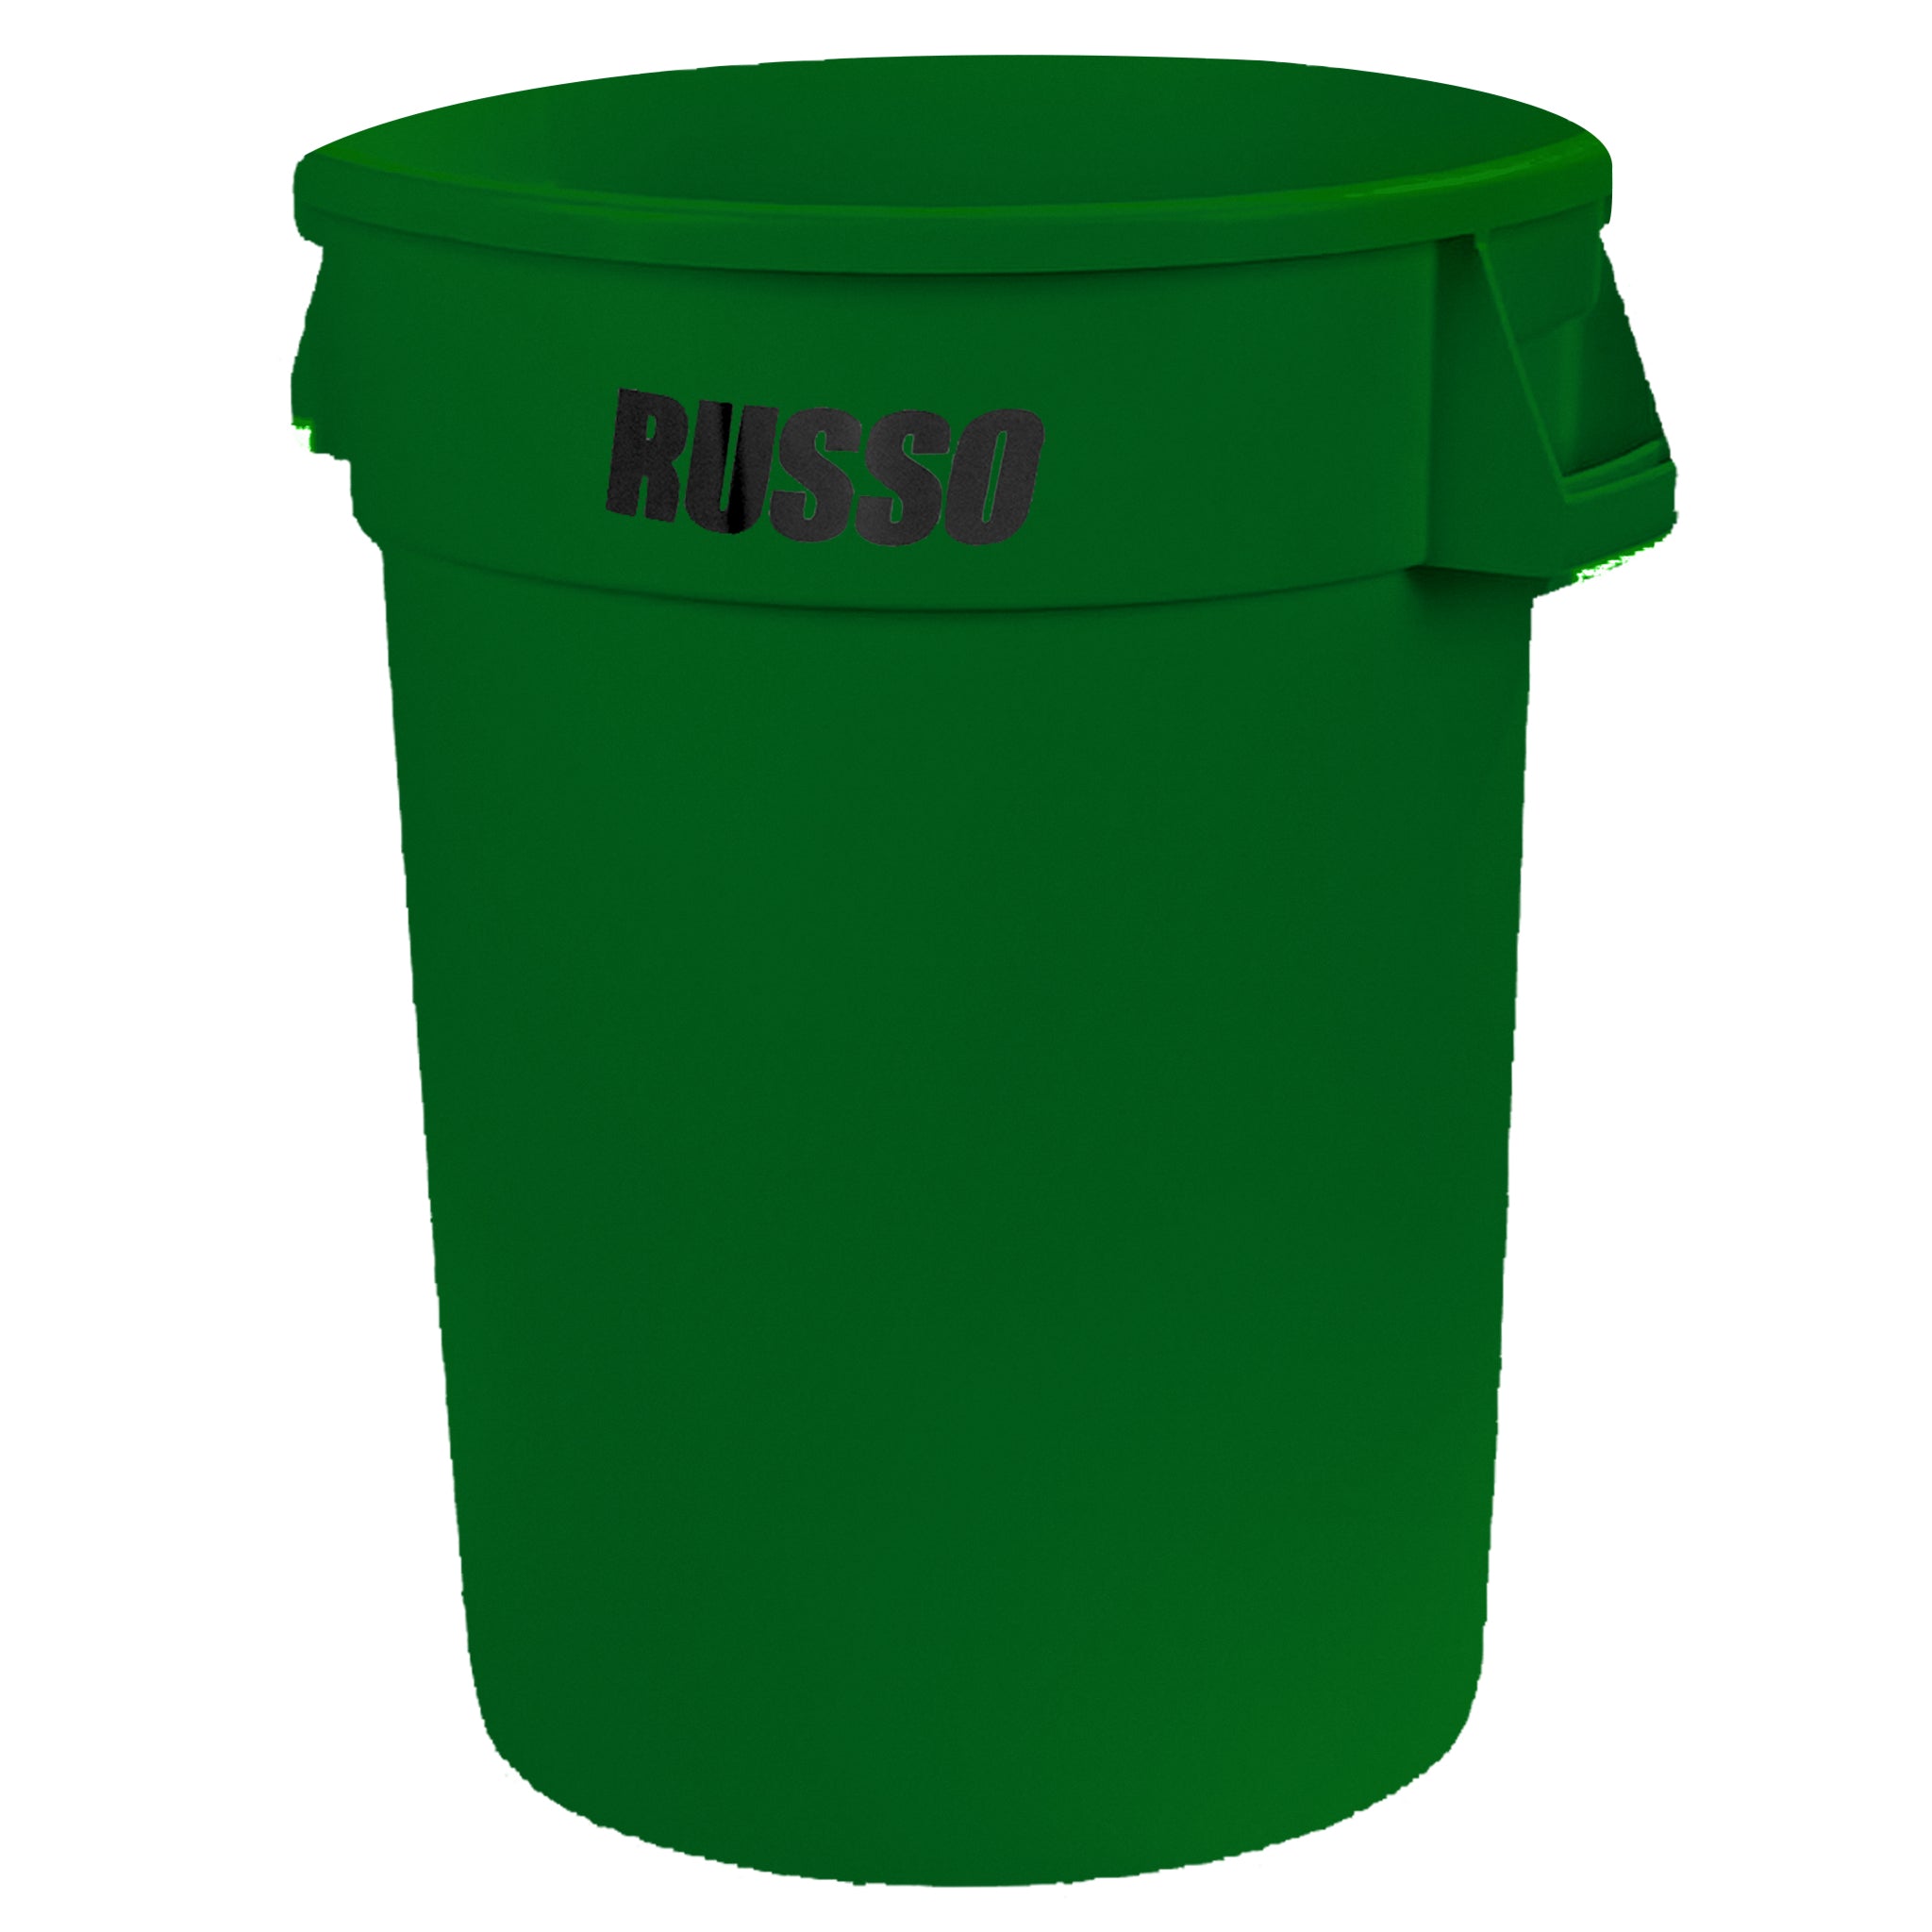 RUSSO Glow Garbage Can 32 Gallon - Green